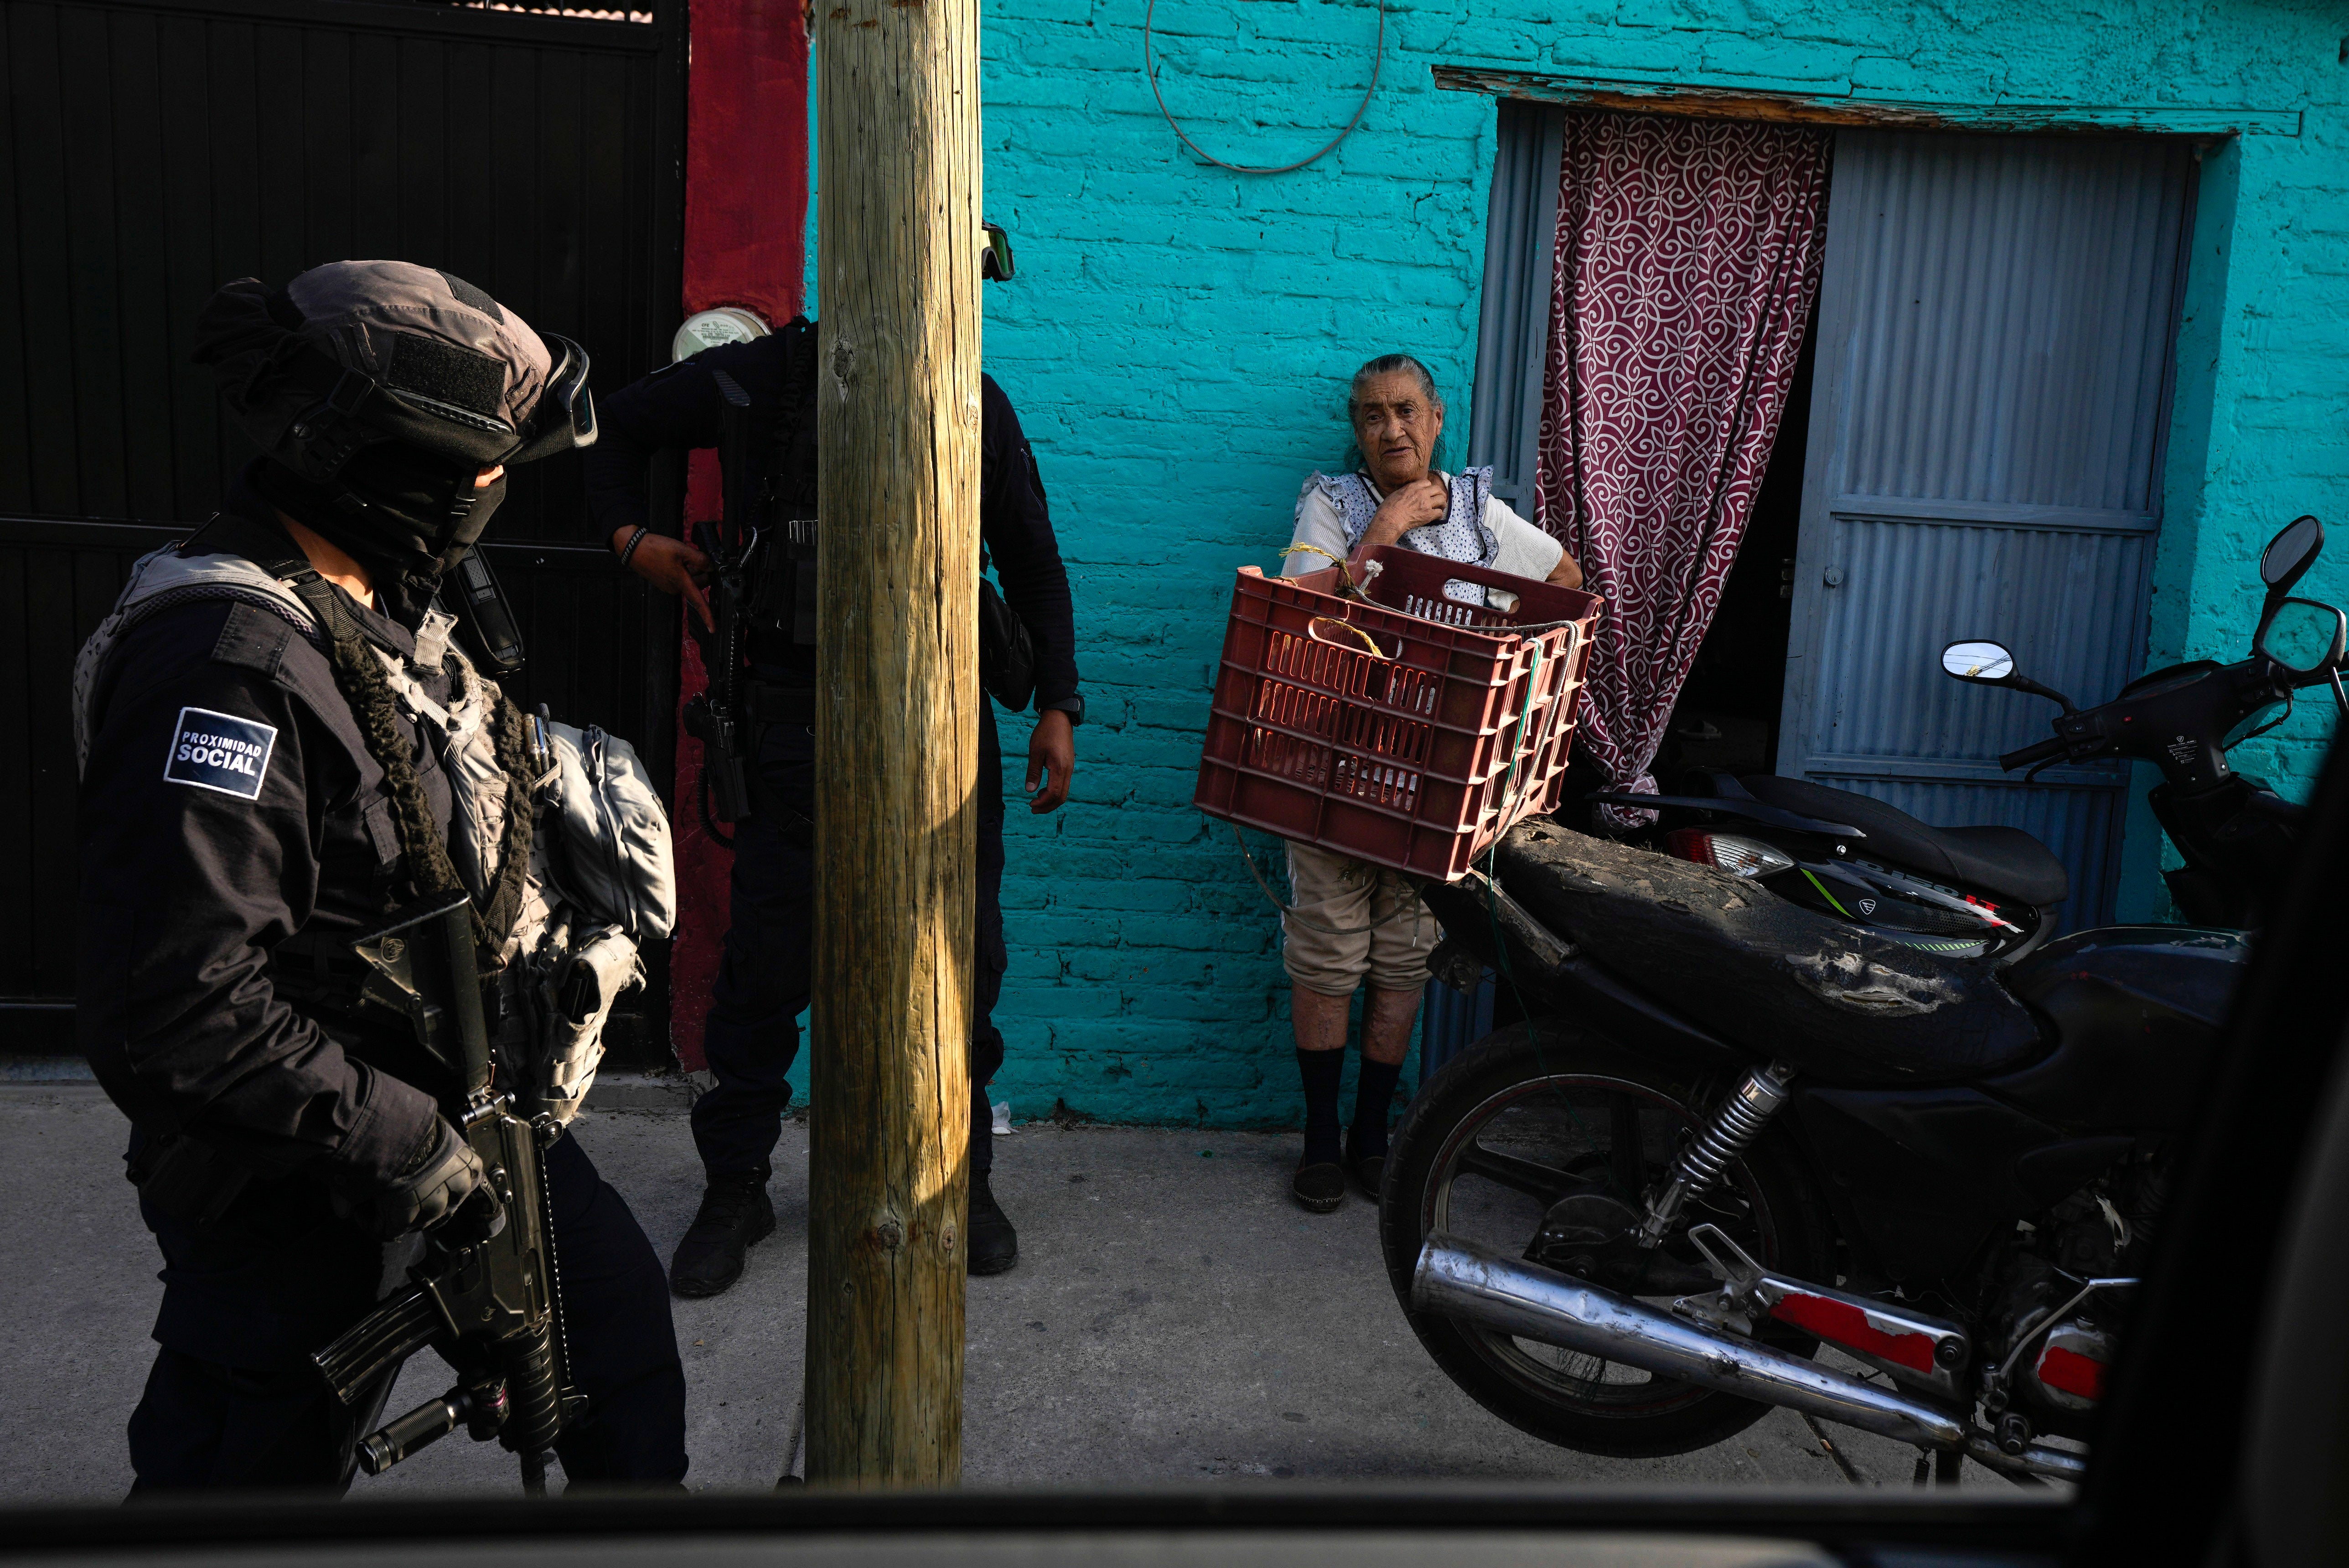 Mexico Police Municipal police officers chat with a resident while on patrol in her neighborhood in Celaya, Mexico